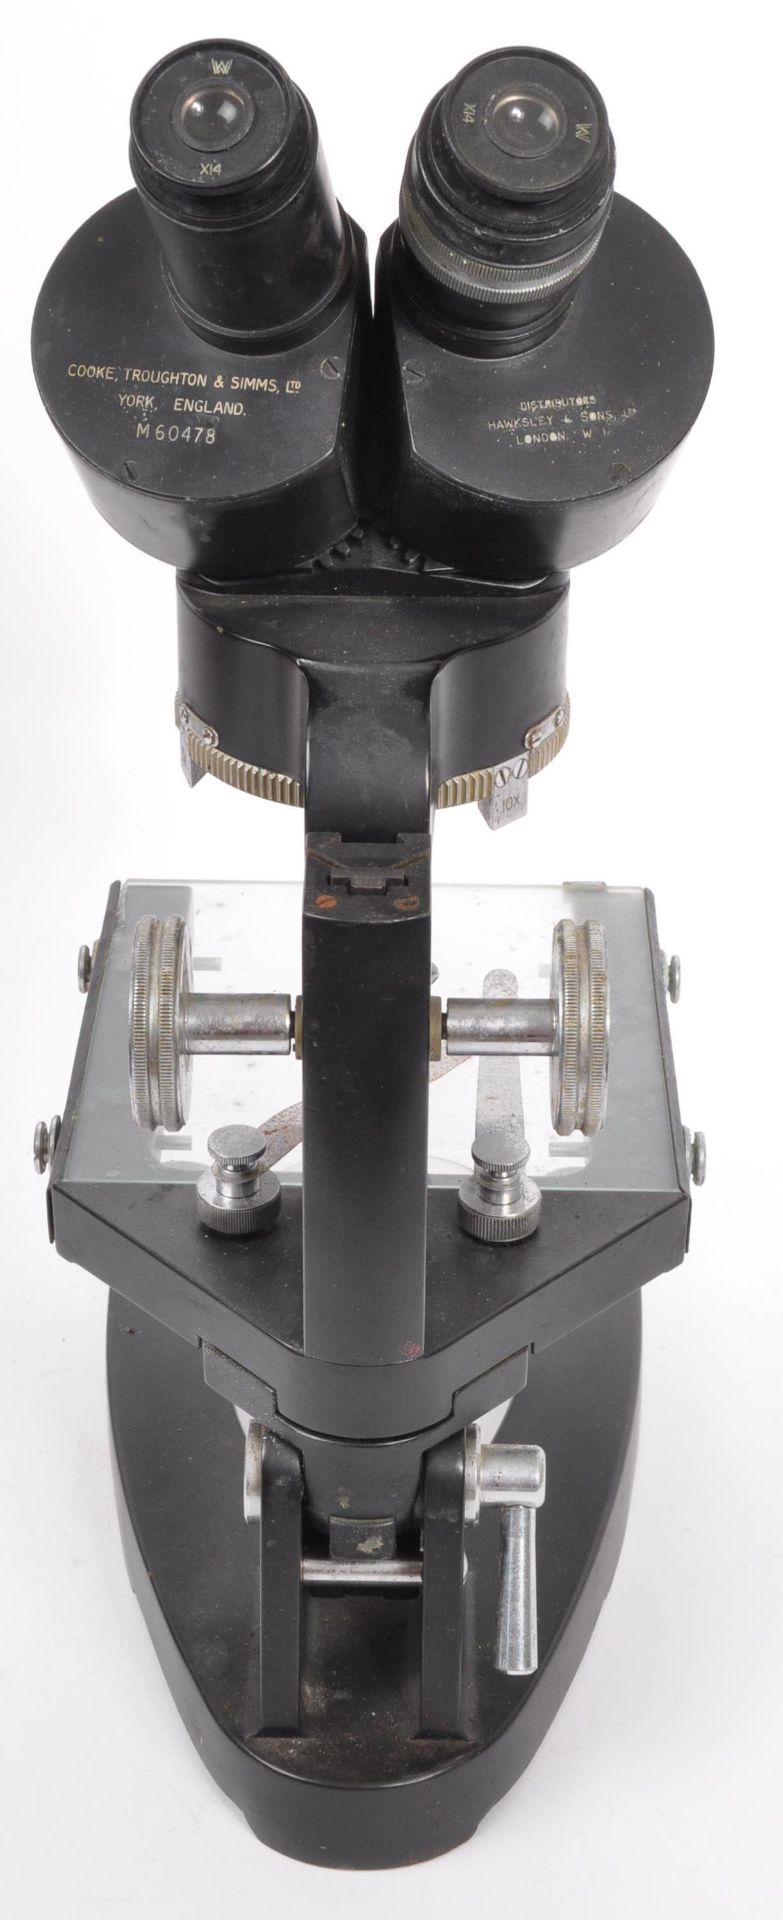 COOKE TROUGHTON & SIMMS CASED MICROSCOPE - Image 3 of 5